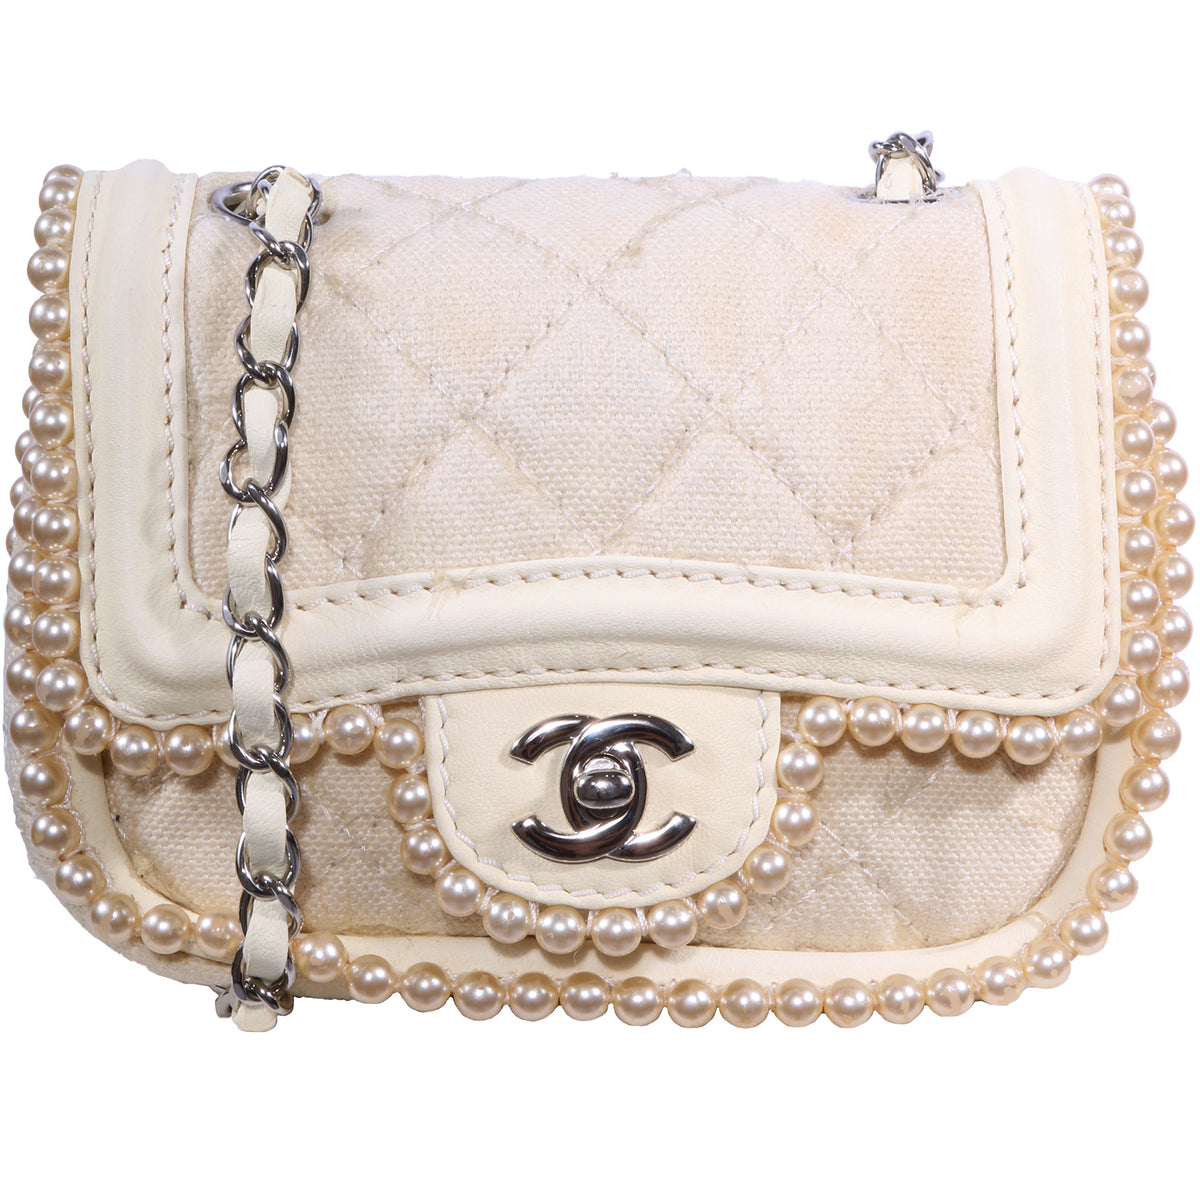 CHANEL Coins Bags & Handbags for Women, Authenticity Guaranteed